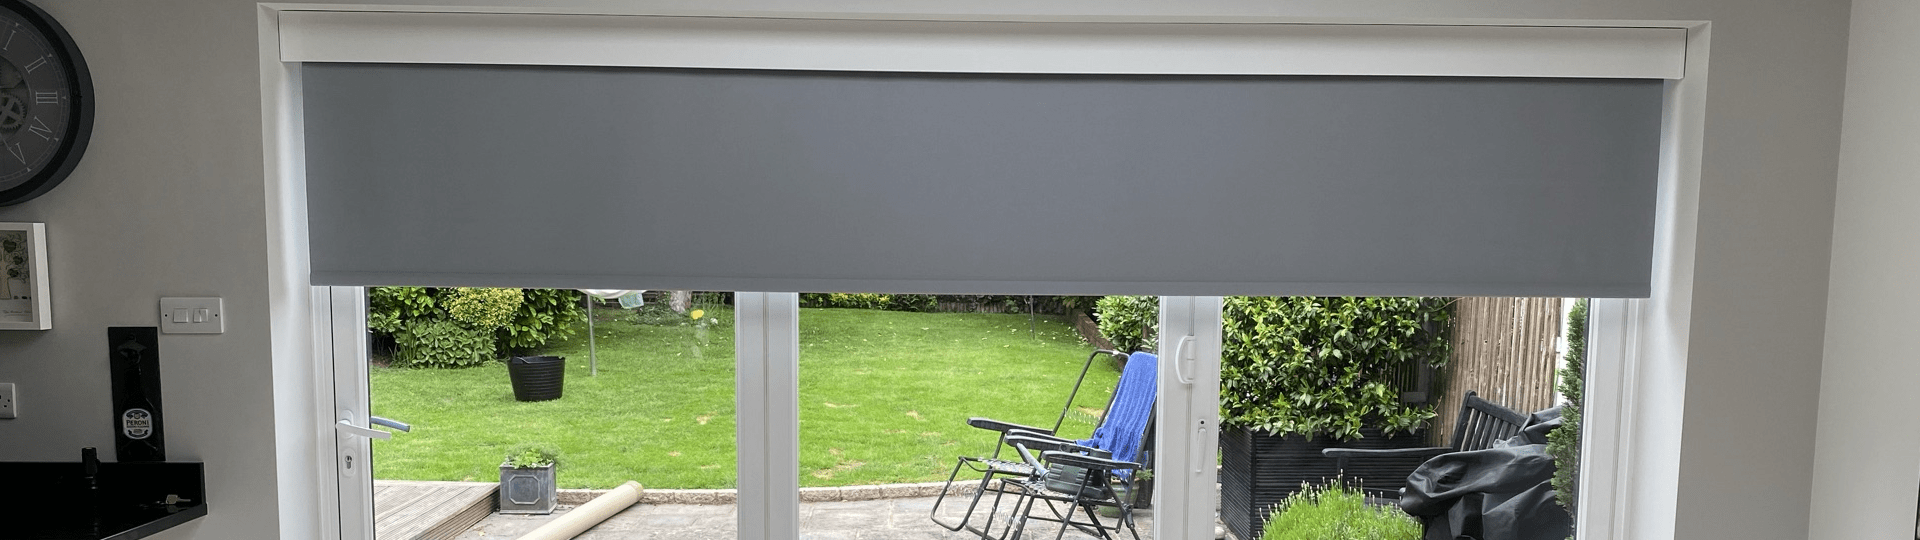 Automatic blackout roller blinds